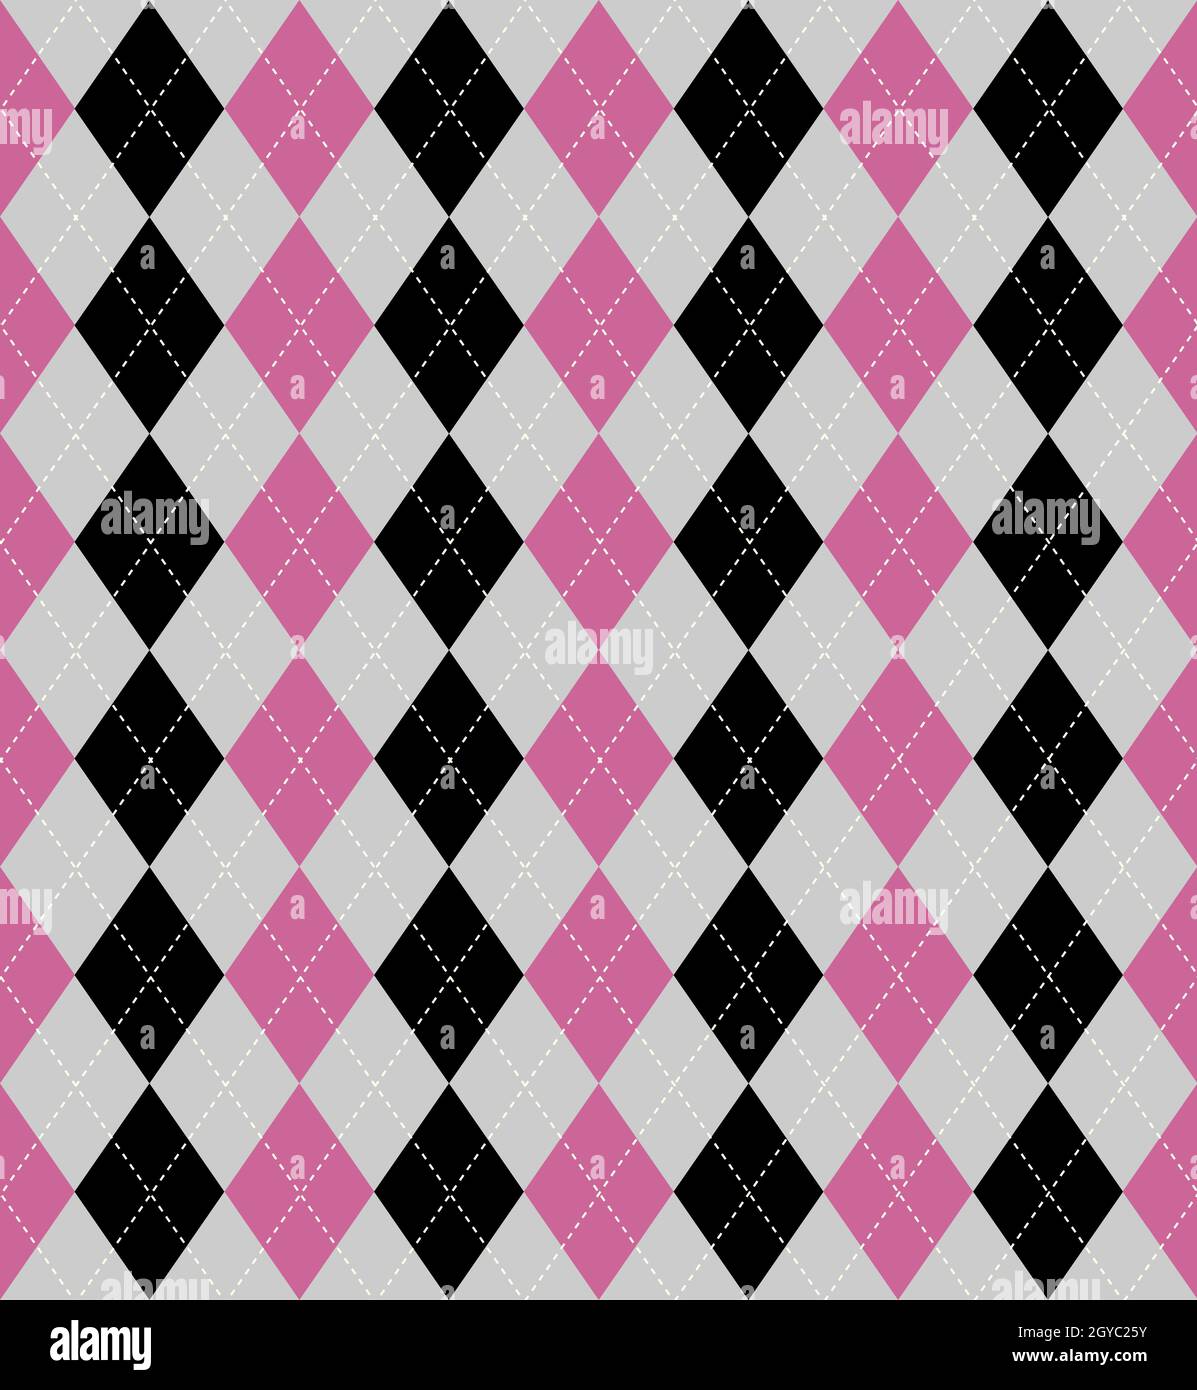 Seamless tiled background of an argyle style pattern Stock Photo